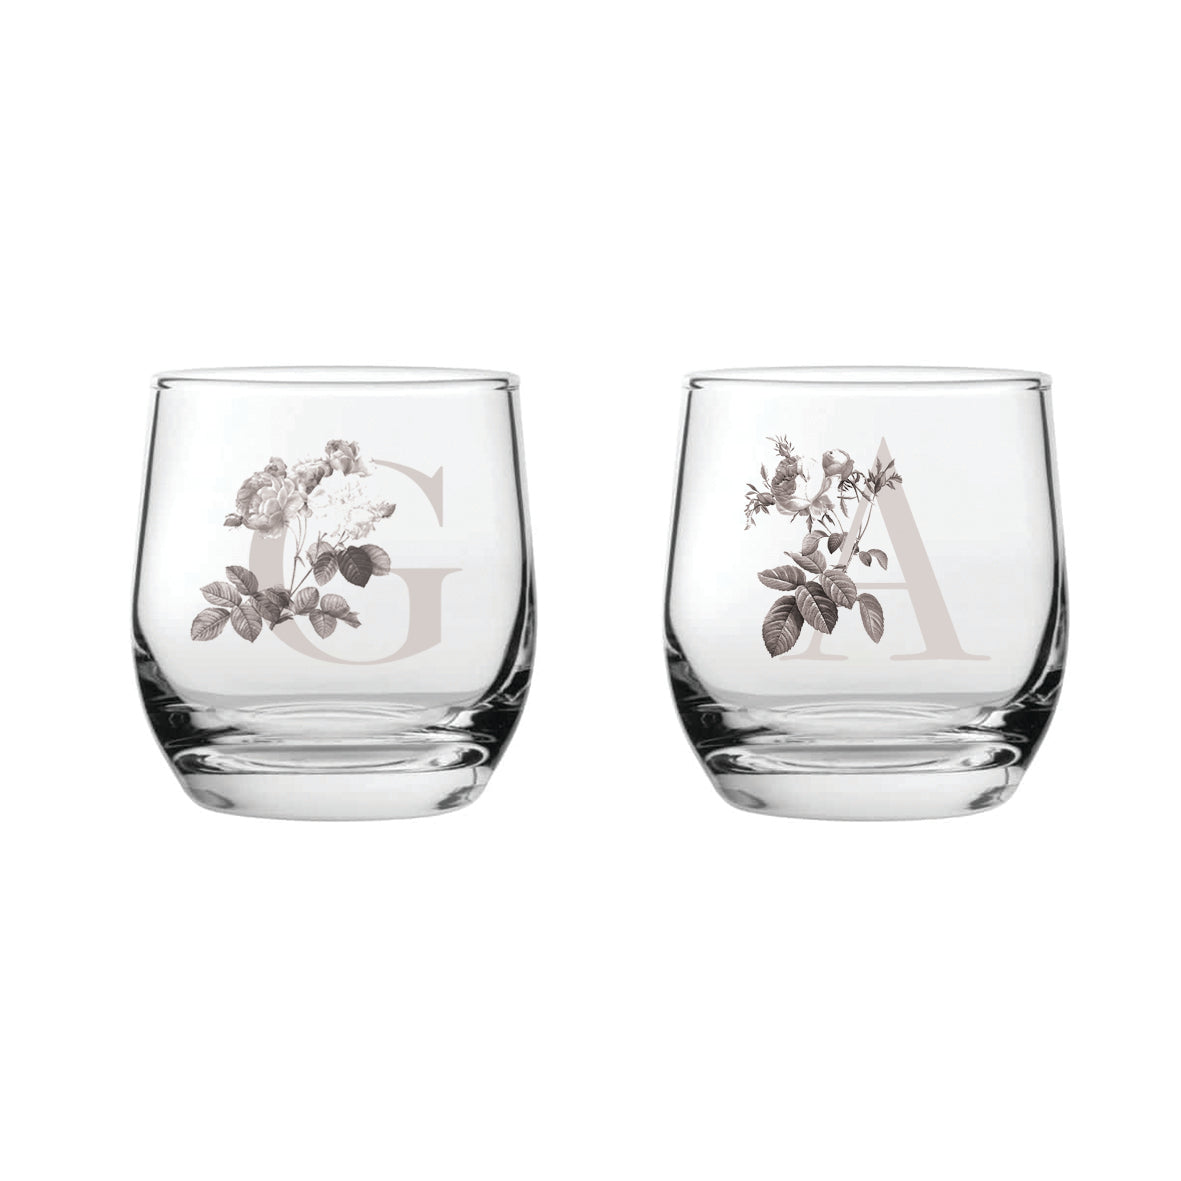 Engraved Glass Tumblers With a Botanical Style Initial